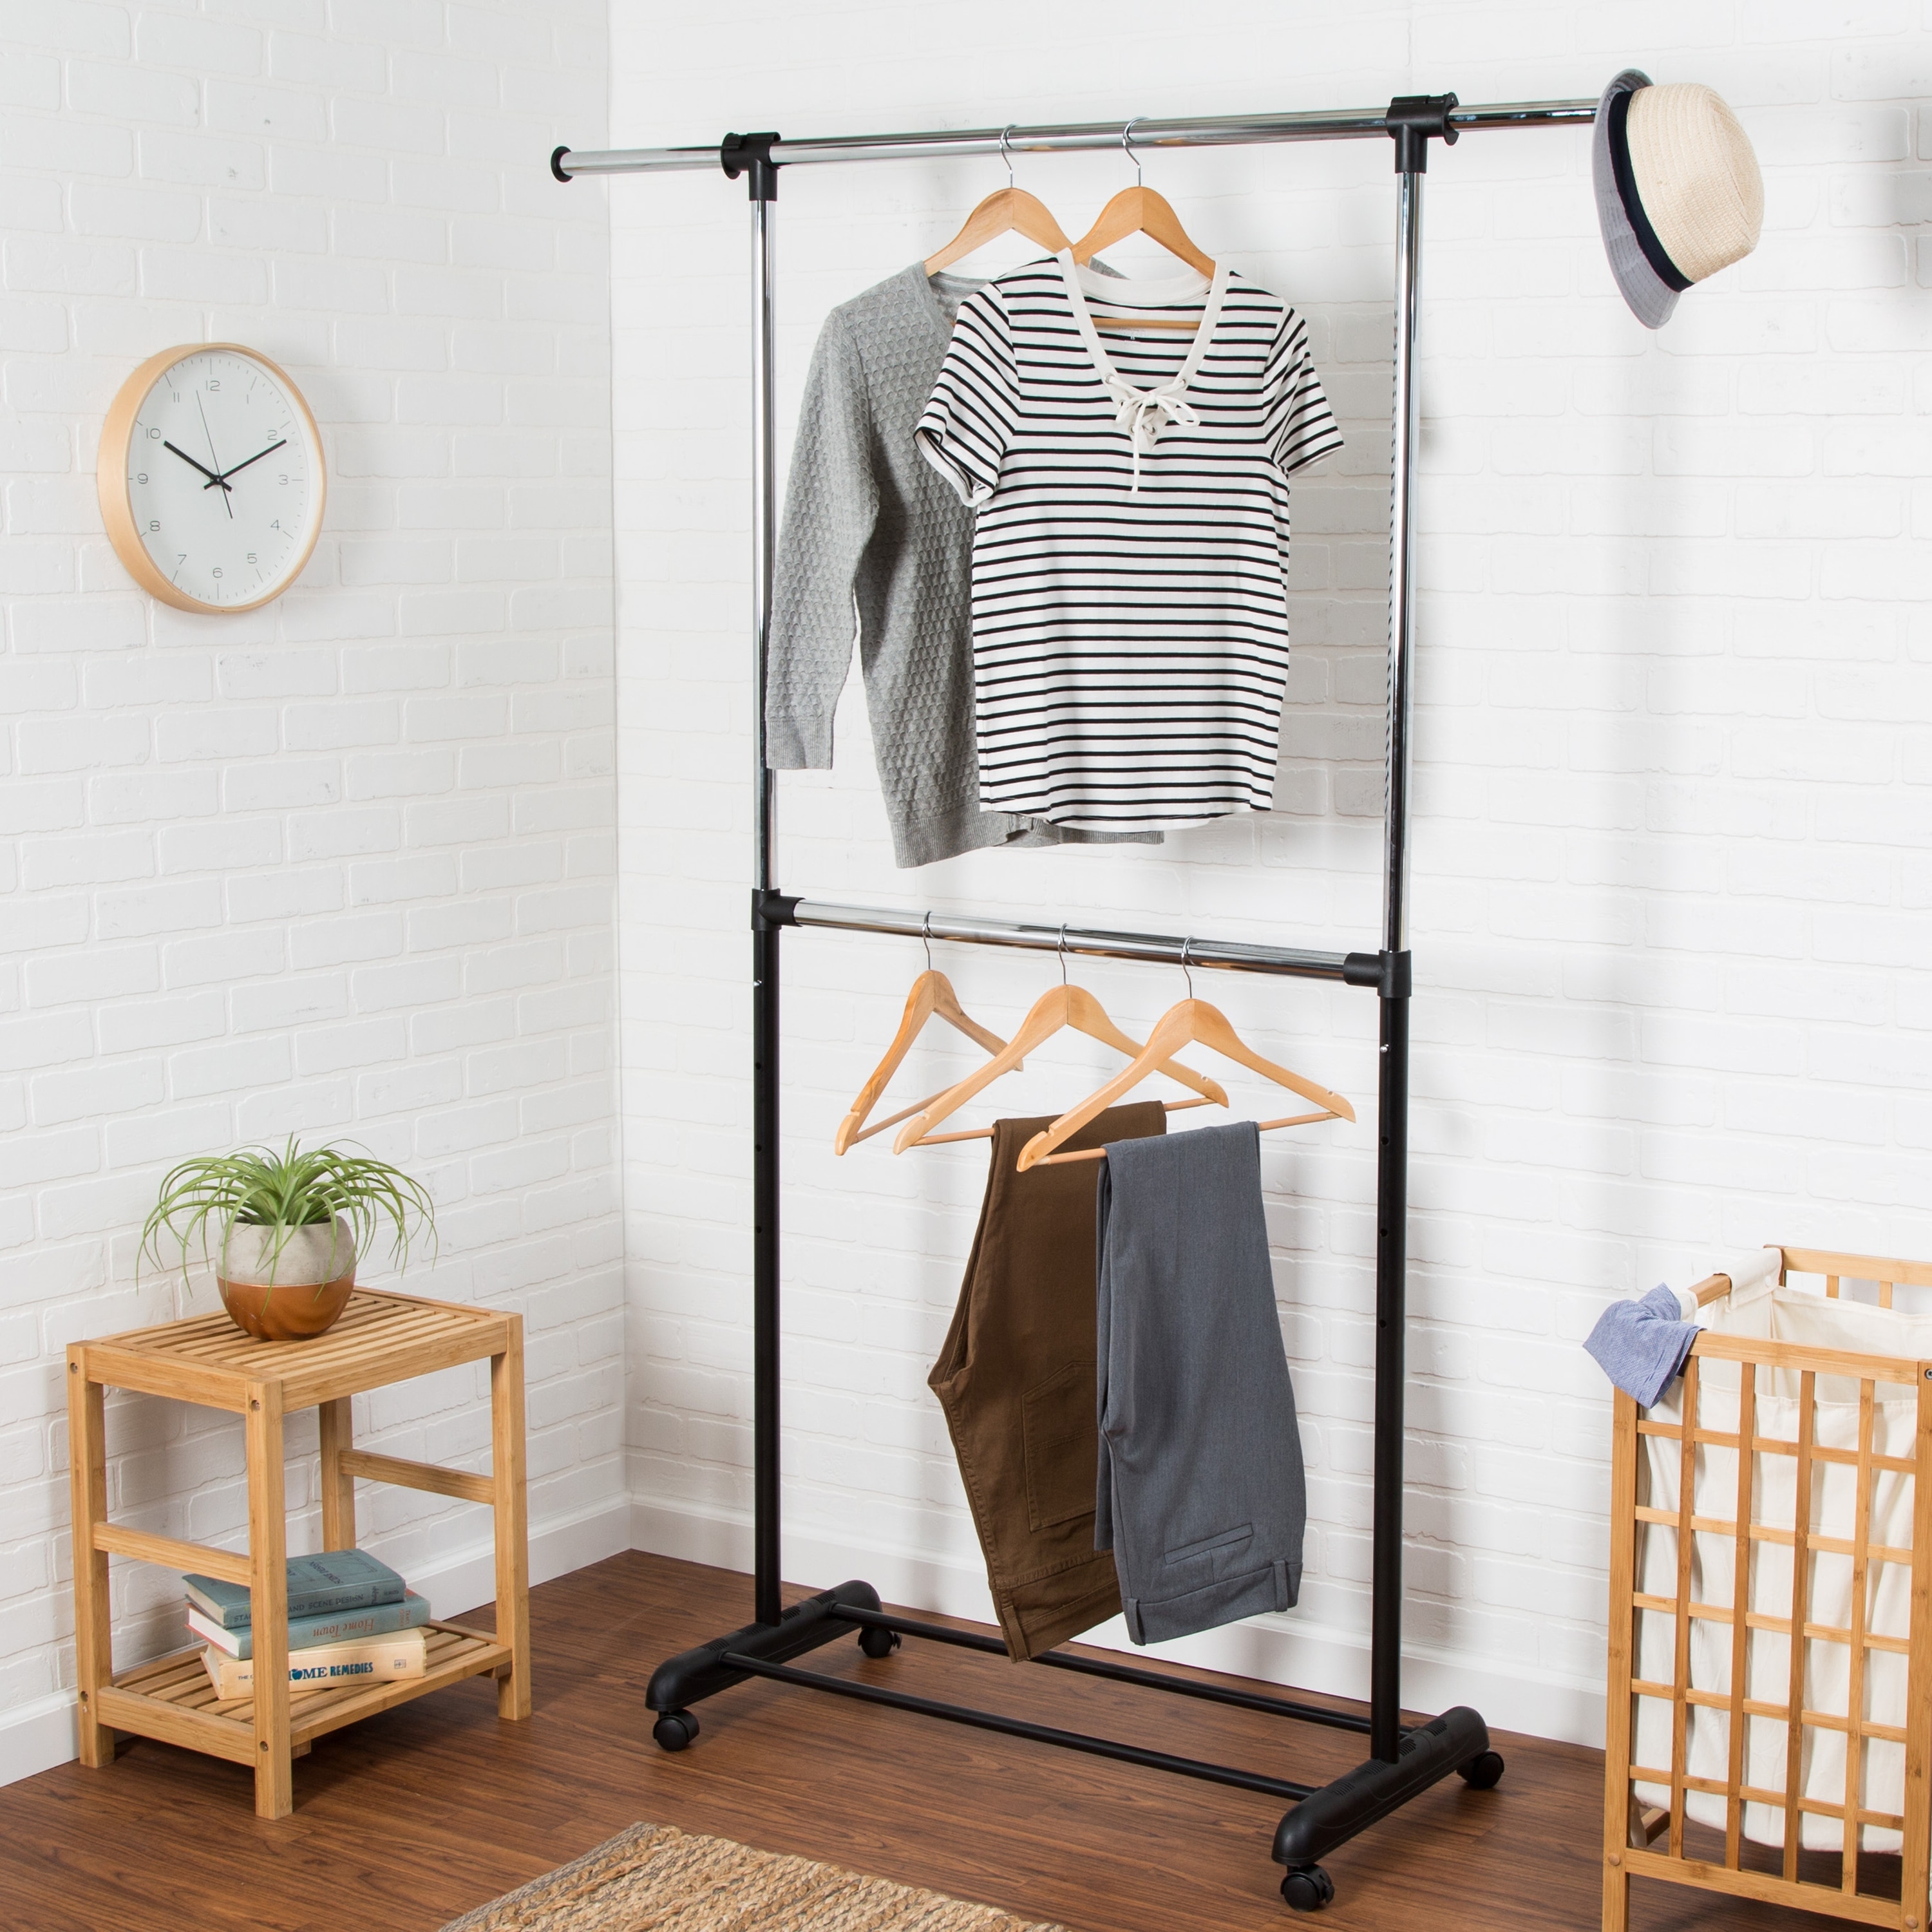 https://ak1.ostkcdn.com/images/products/is/images/direct/83dfffb41a7200a491447f7ca6d27cbce9bd1516/Chrome-Adjustable-Rolling-Metal-Double-Clothes-Rack.jpg